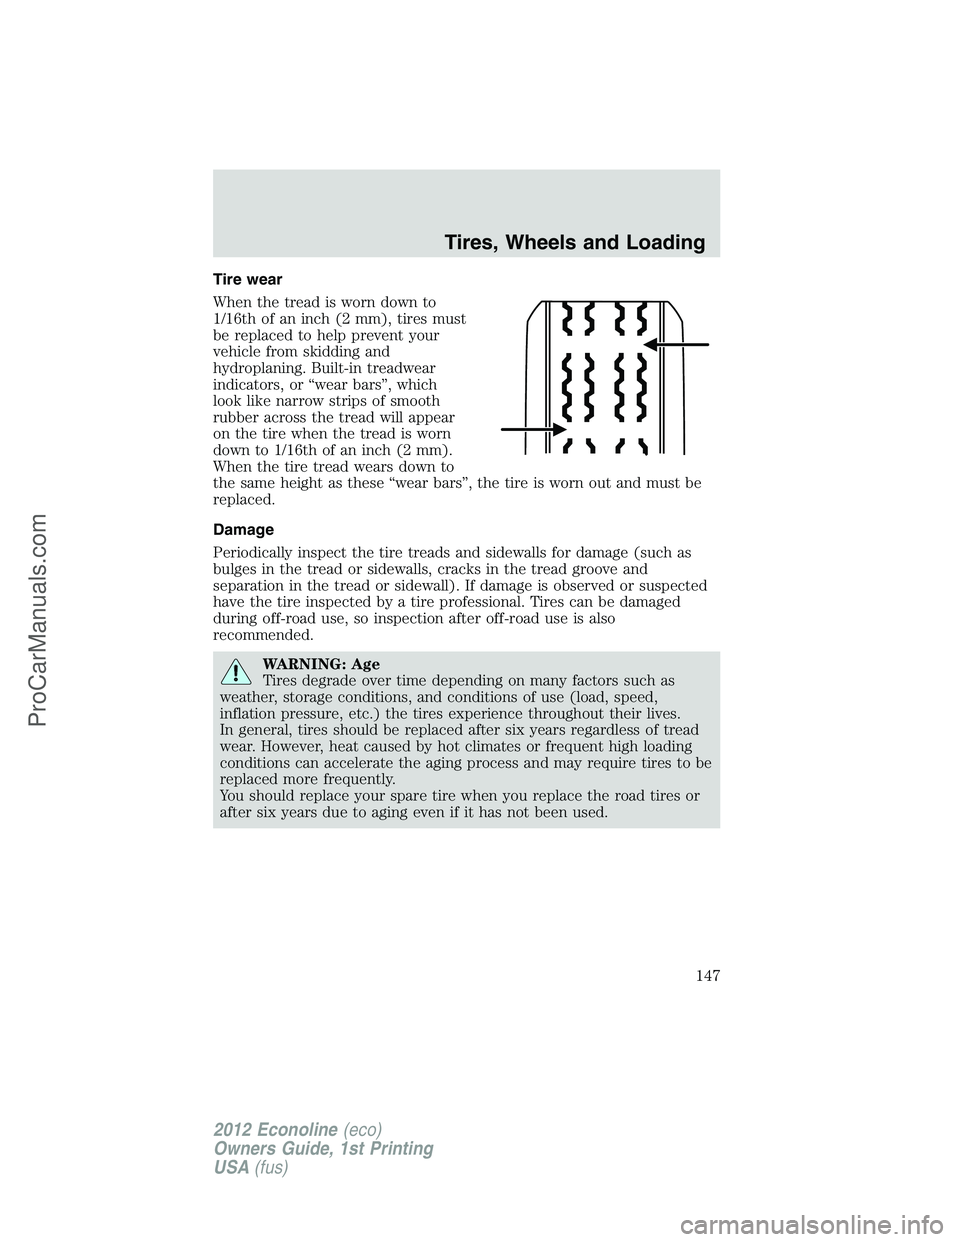 FORD E-350 2012  Owners Manual Tire wear
When the tread is worn down to
1/16th of an inch (2 mm), tires must
be replaced to help prevent your
vehicle from skidding and
hydroplaning. Built-in treadwear
indicators, or “wear bars”